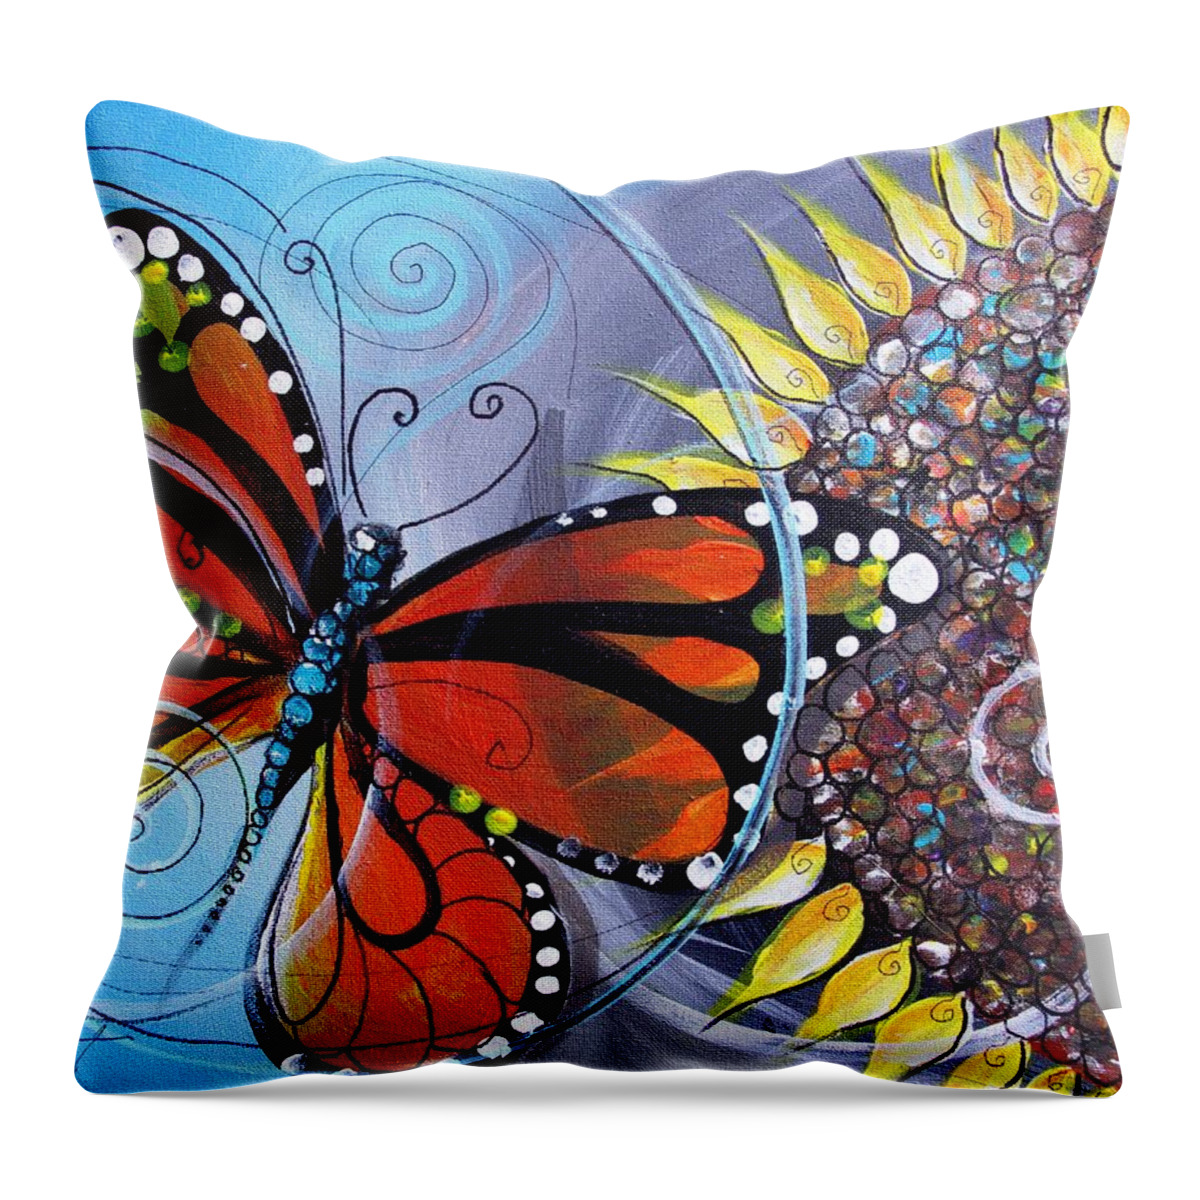 From An Original Painting By J. Vincent Scarpace. Throw Pillow featuring the painting And Another Approachable Approach by J Vincent Scarpace